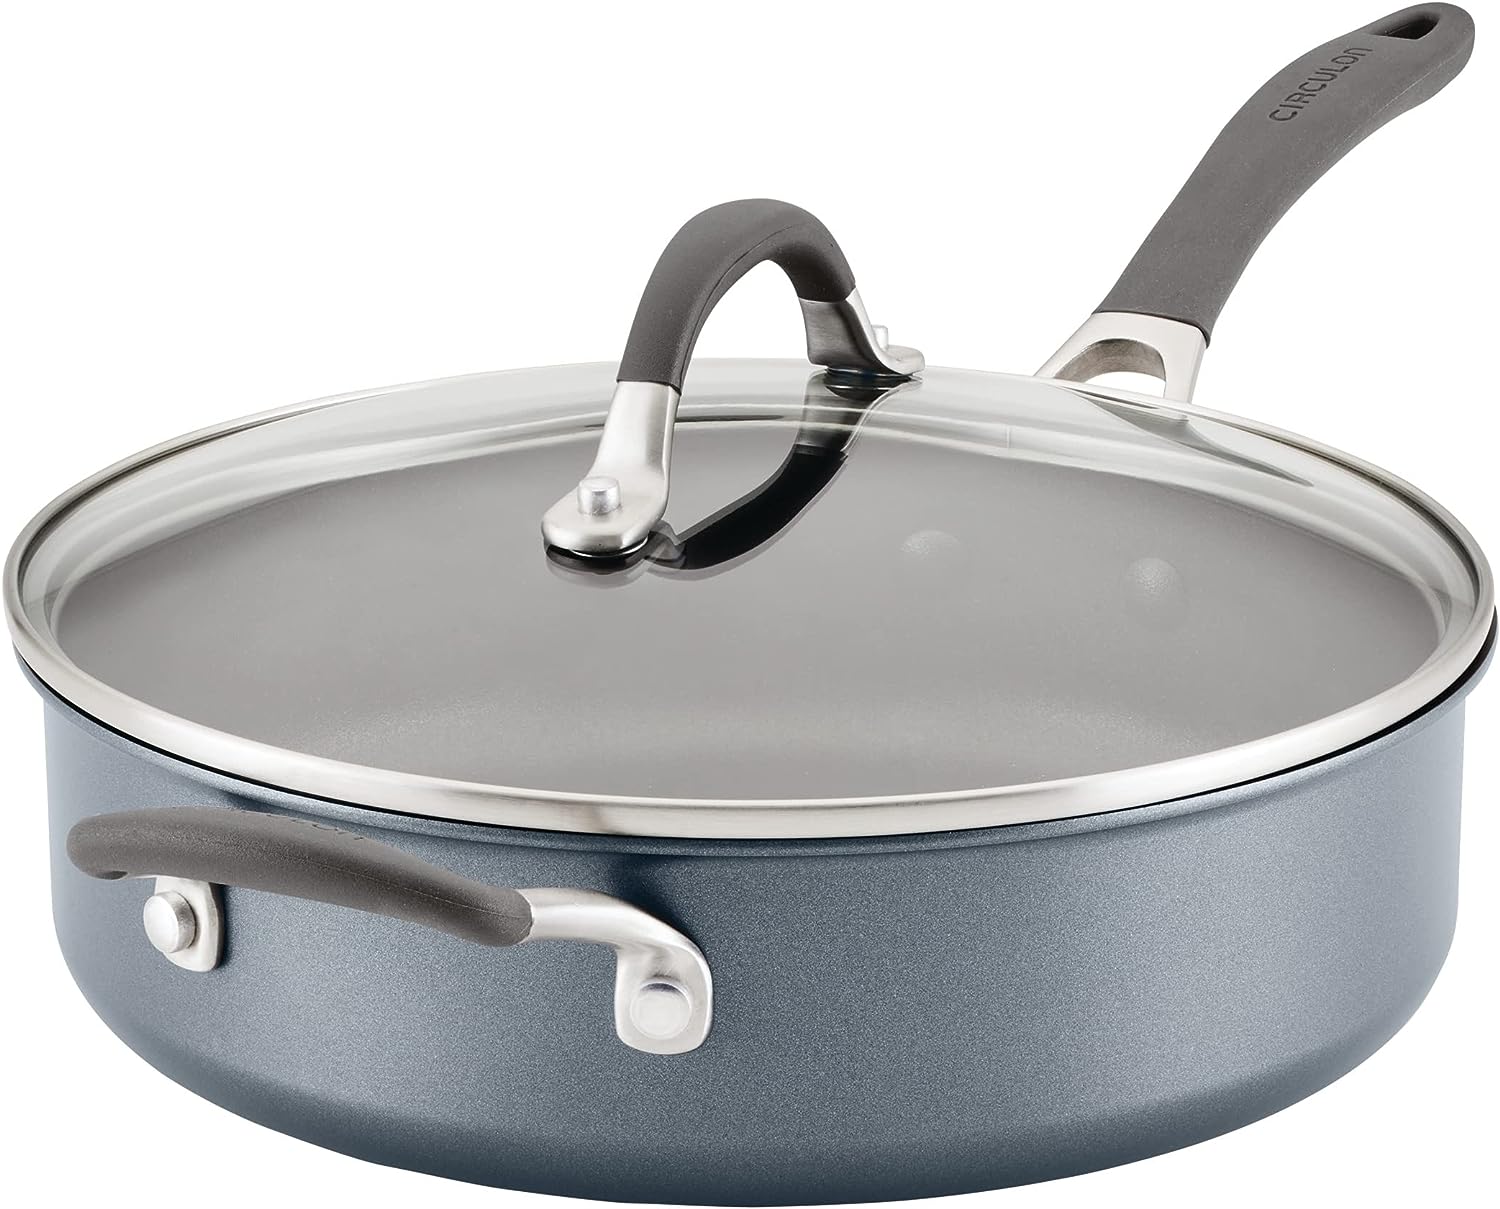 https://bigbigmart.com/wp-content/uploads/2023/08/Circulon-A1-Series-with-ScratchDefense-Technology-Nonstick-Induction-Saute-Pan-with-Helper-Handle-and-Lid-5-Quart-Graphite.jpg